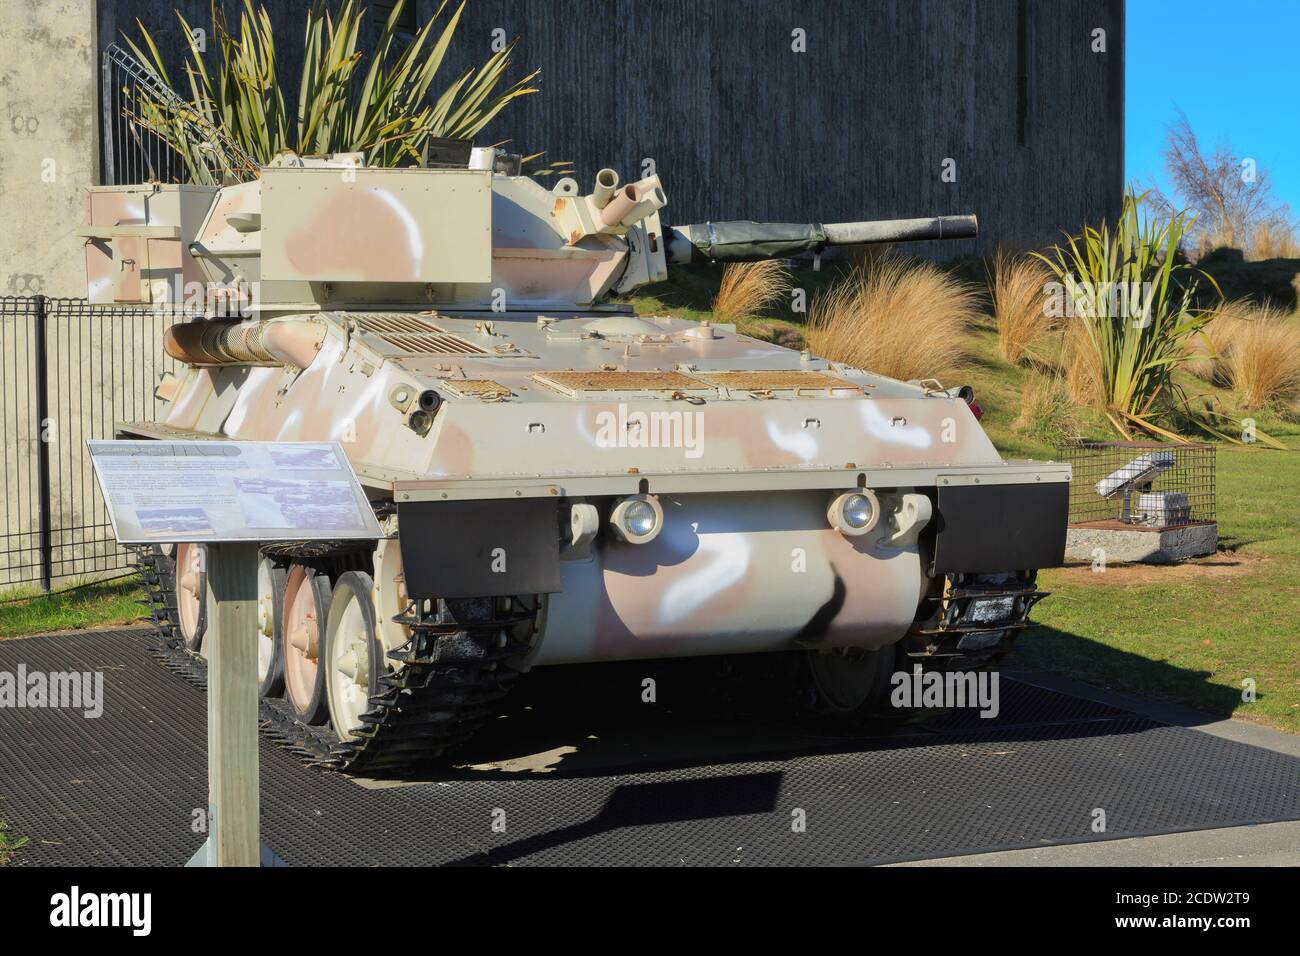 A Scorpion CVR (Combat Vehicle, Reconnaissance), a British light tank in use since 1970, on display at the National Army Museum, Waiouru, New Zealand Stock Photo